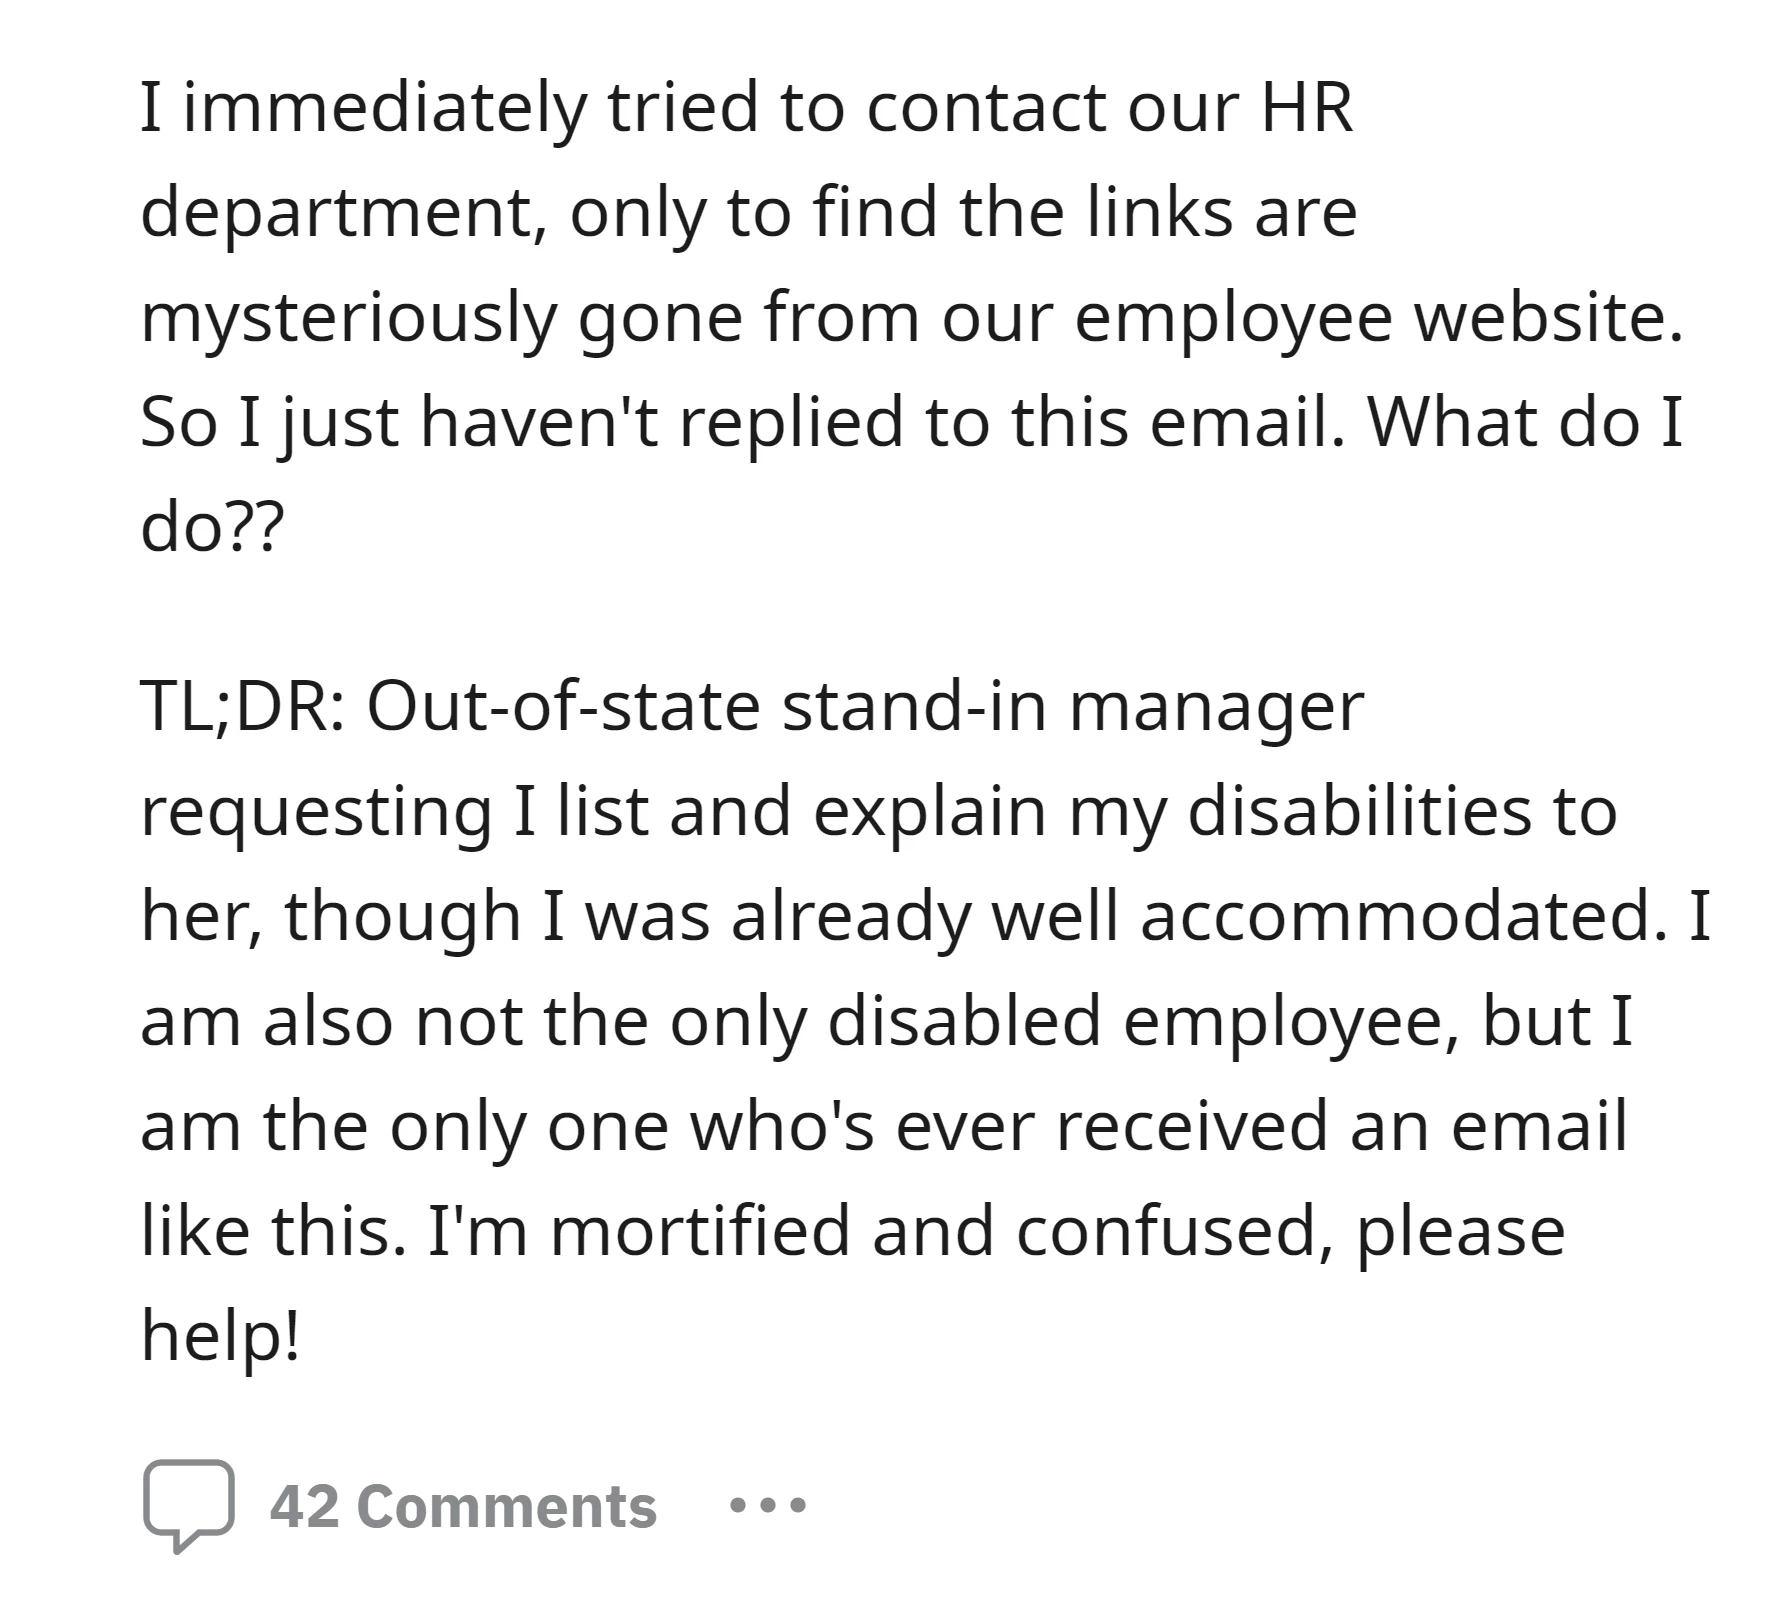 HR contact links was missing from the website, so OP hasn't replied